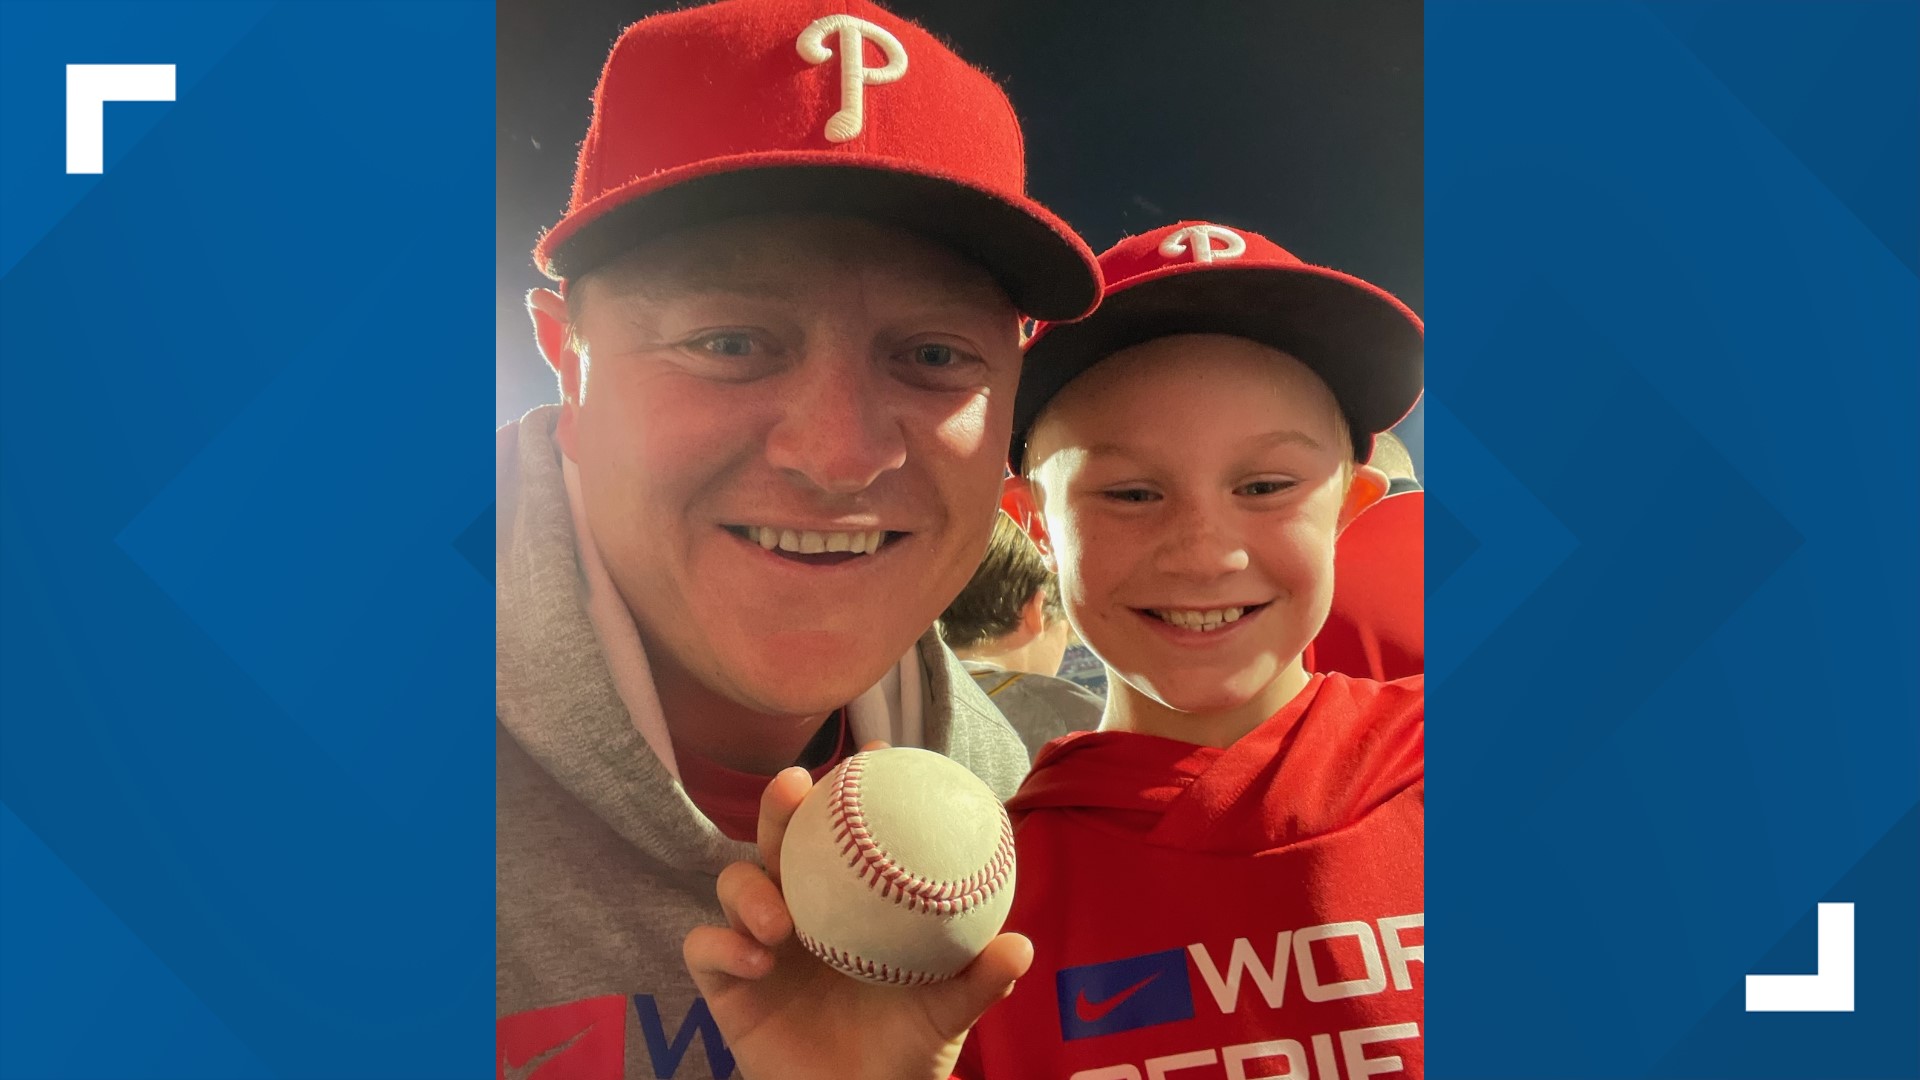 The unforgettable moment turned what was already a once-in-a-lifetime experience for Andy Hartstein and his son Hudson into something even better.